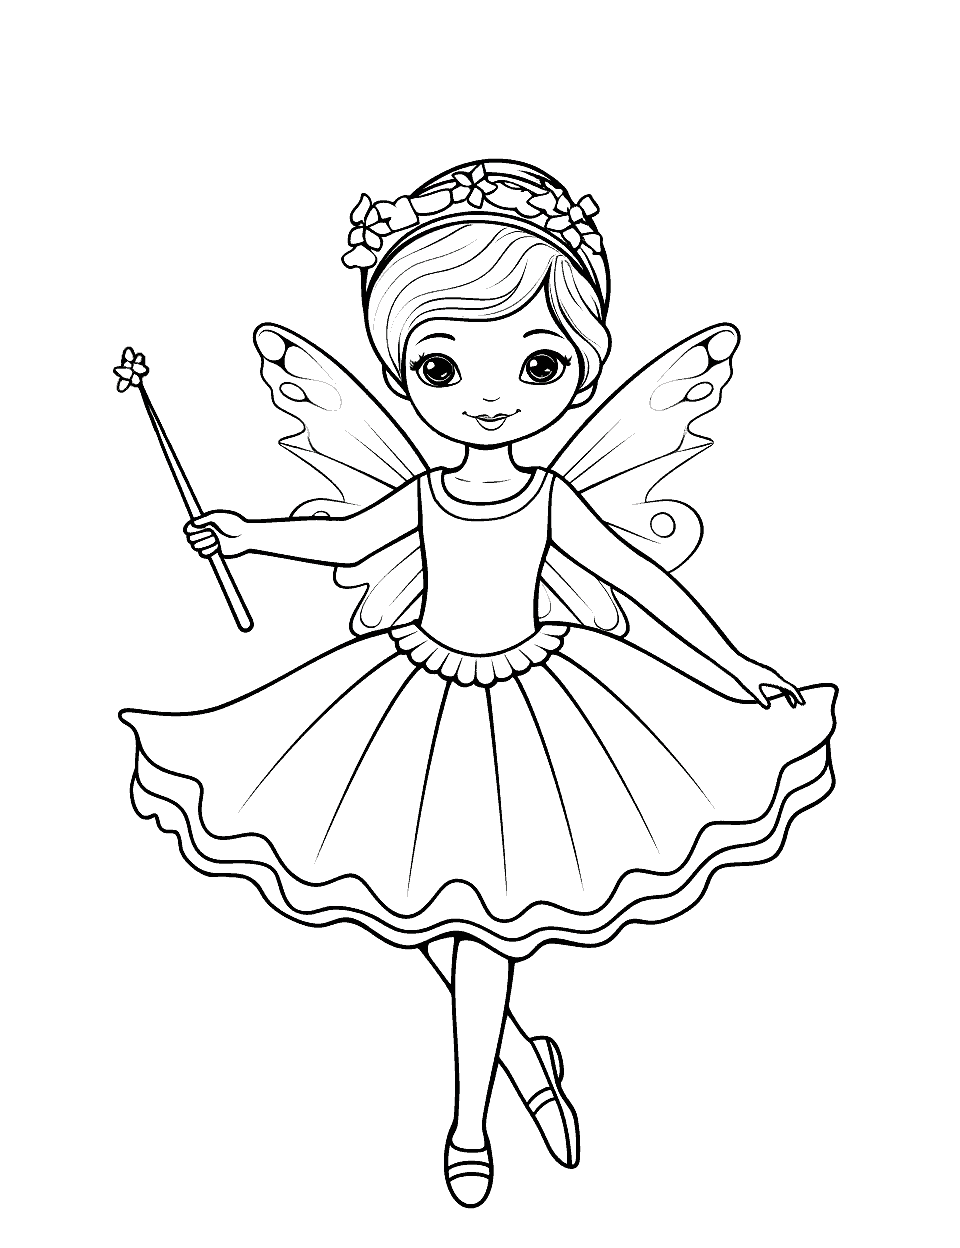 Fairy Tale Ballerina Coloring Page - A ballerina dressed as a fairy, with wings and a magic wand.